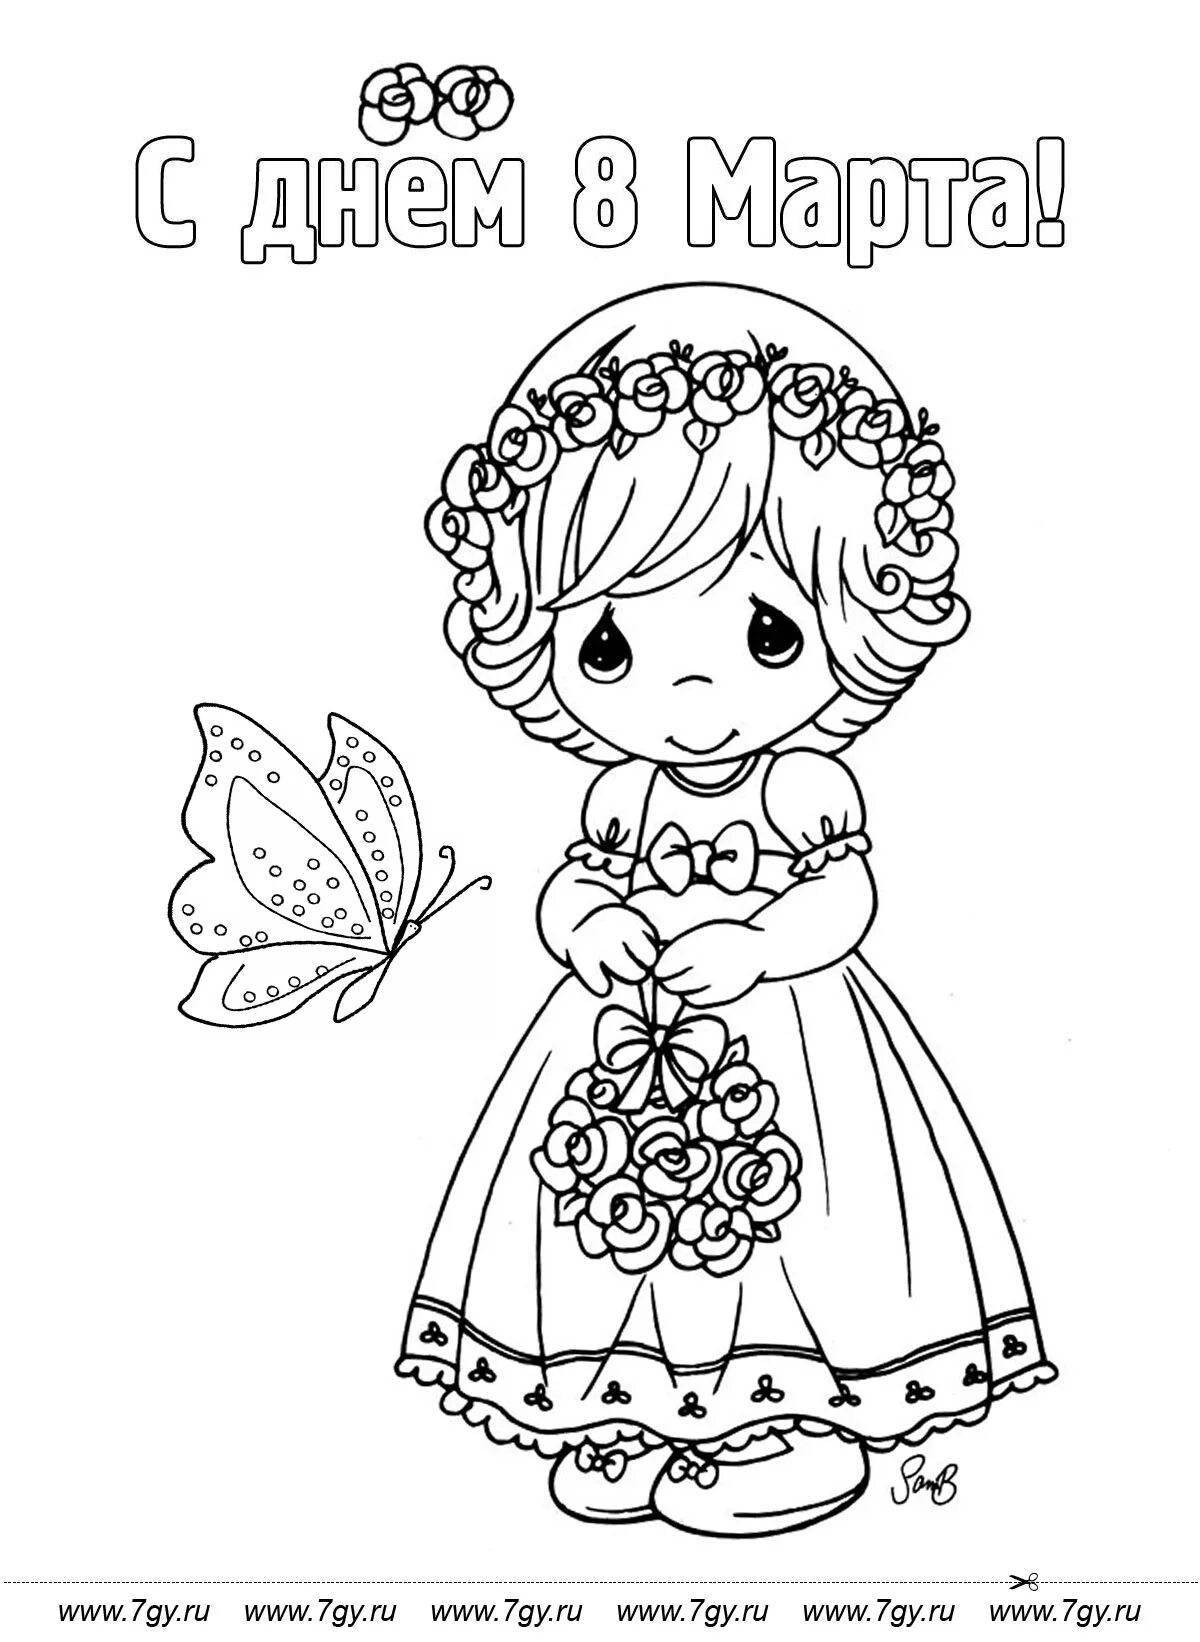 Playful March 8 coloring for girls